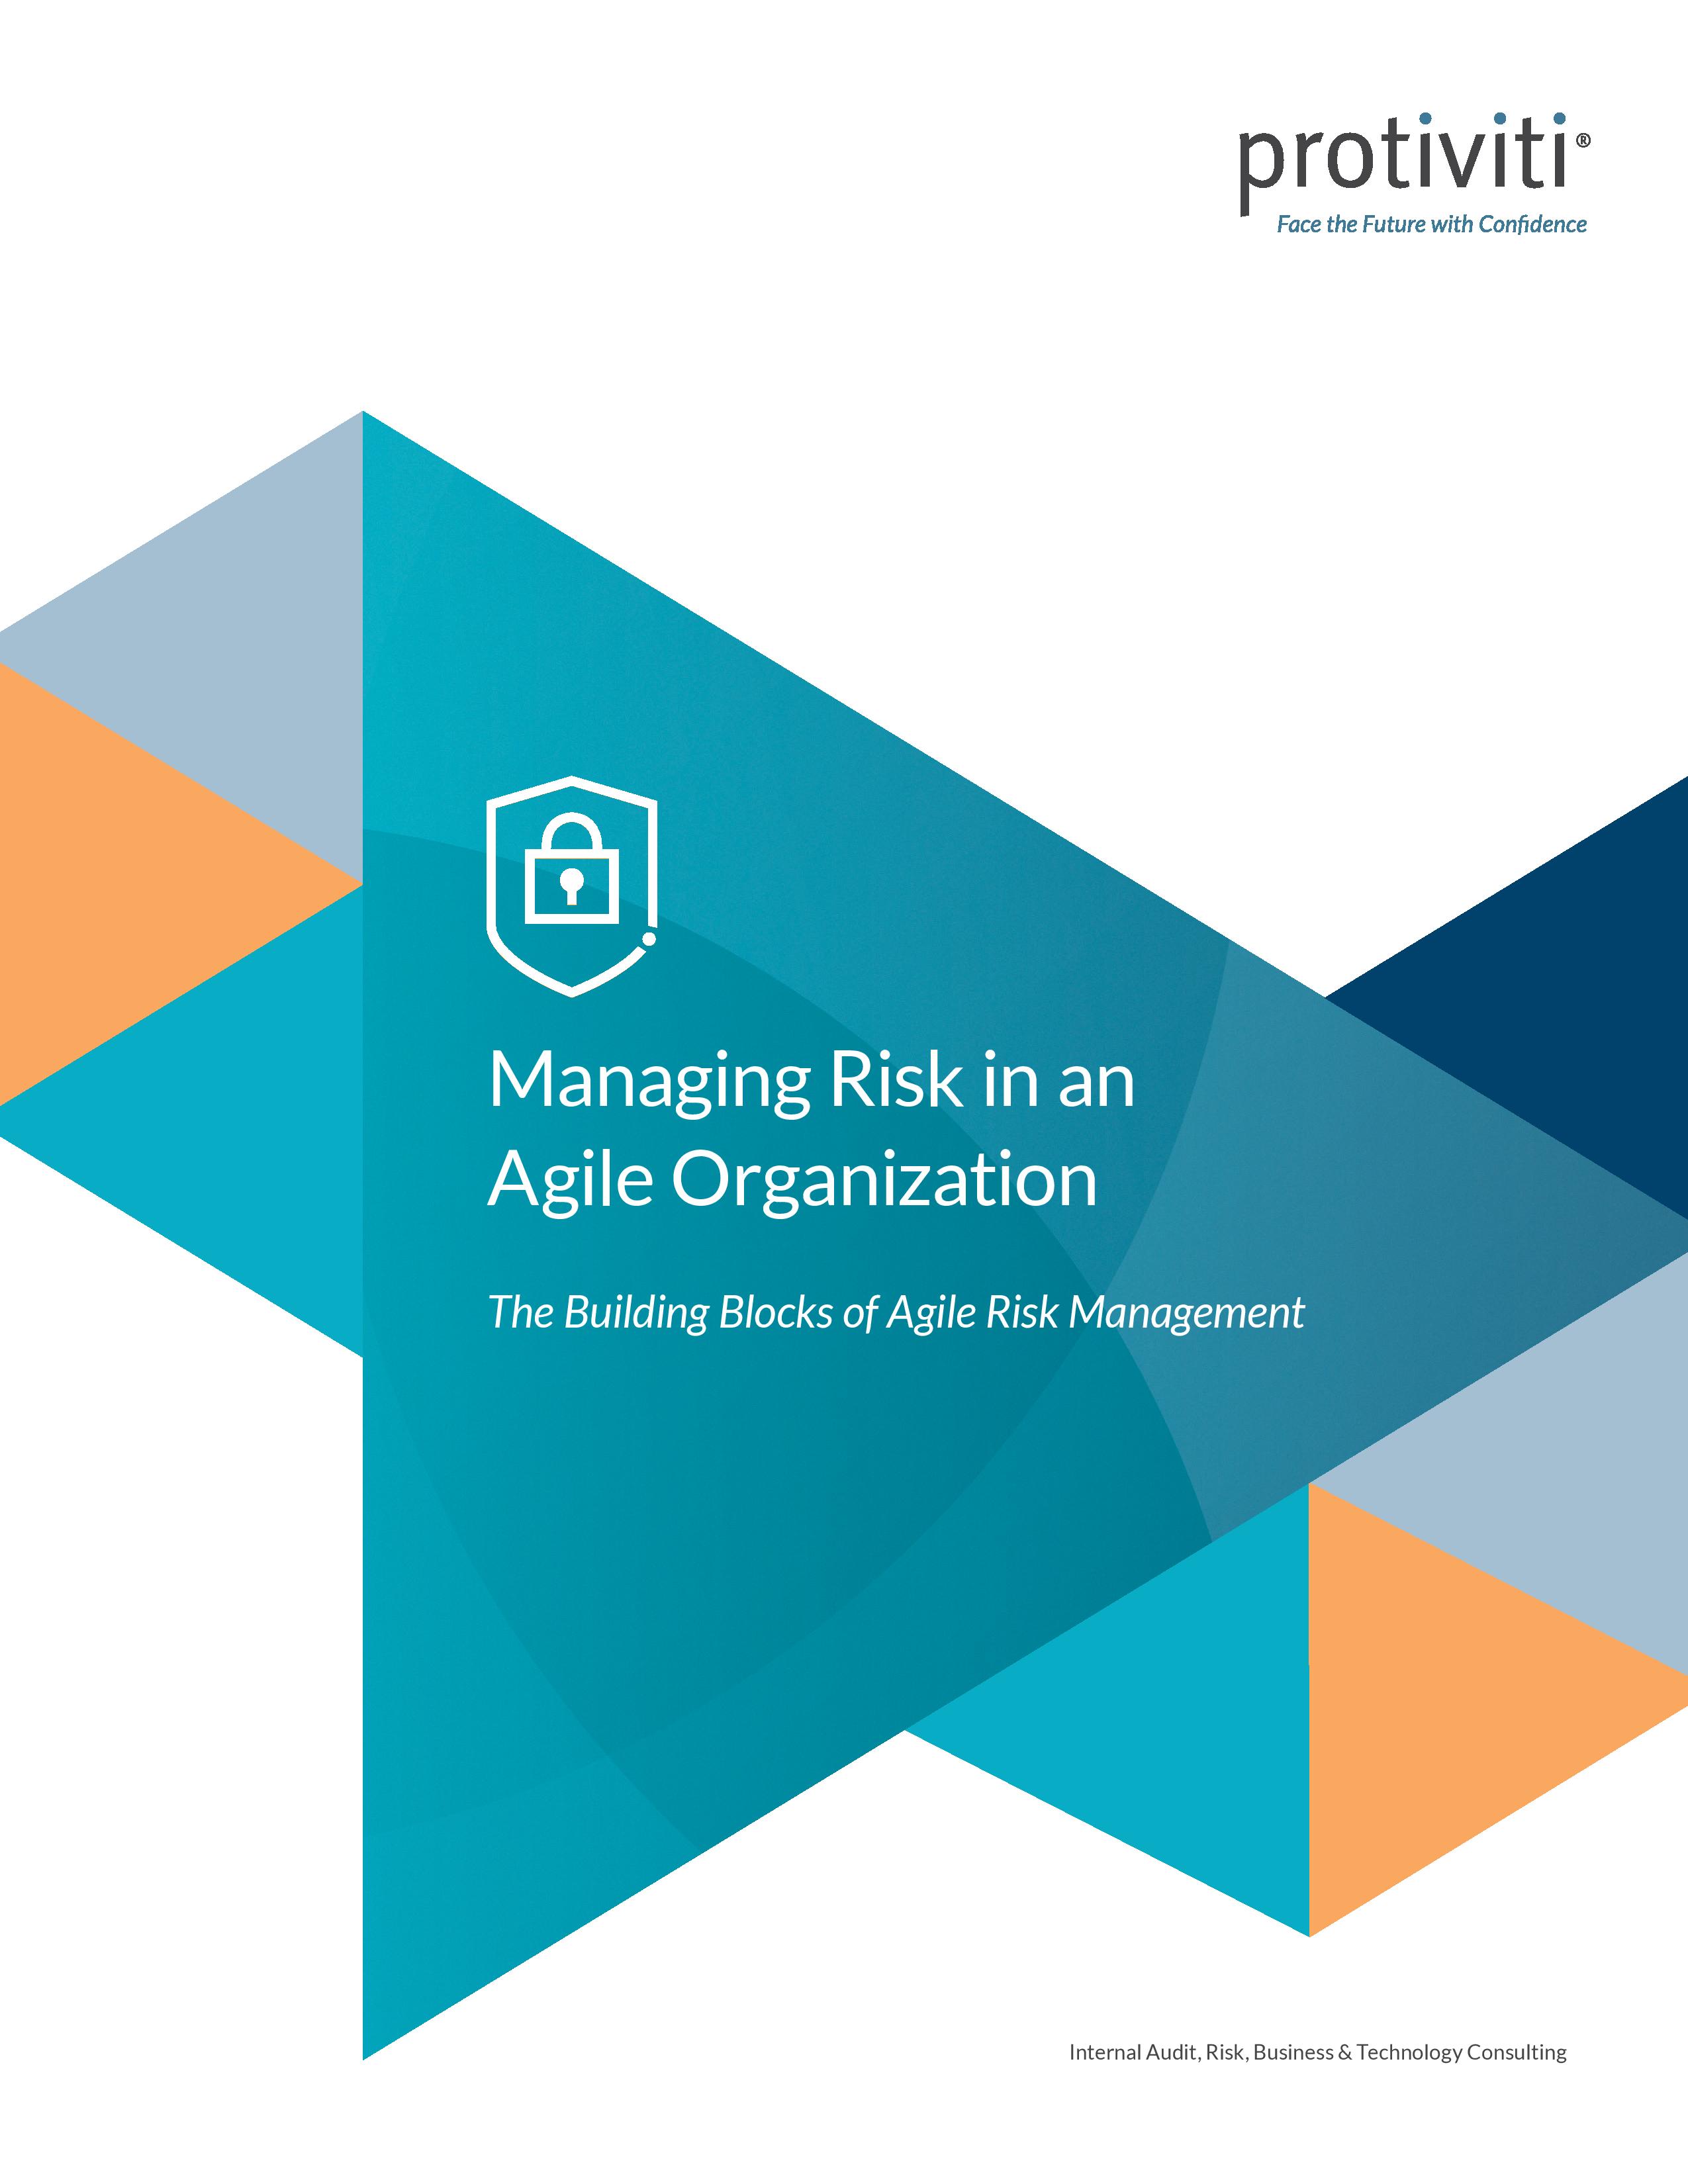 Screenshot of the first page of Managing Risk in an Agile Organization